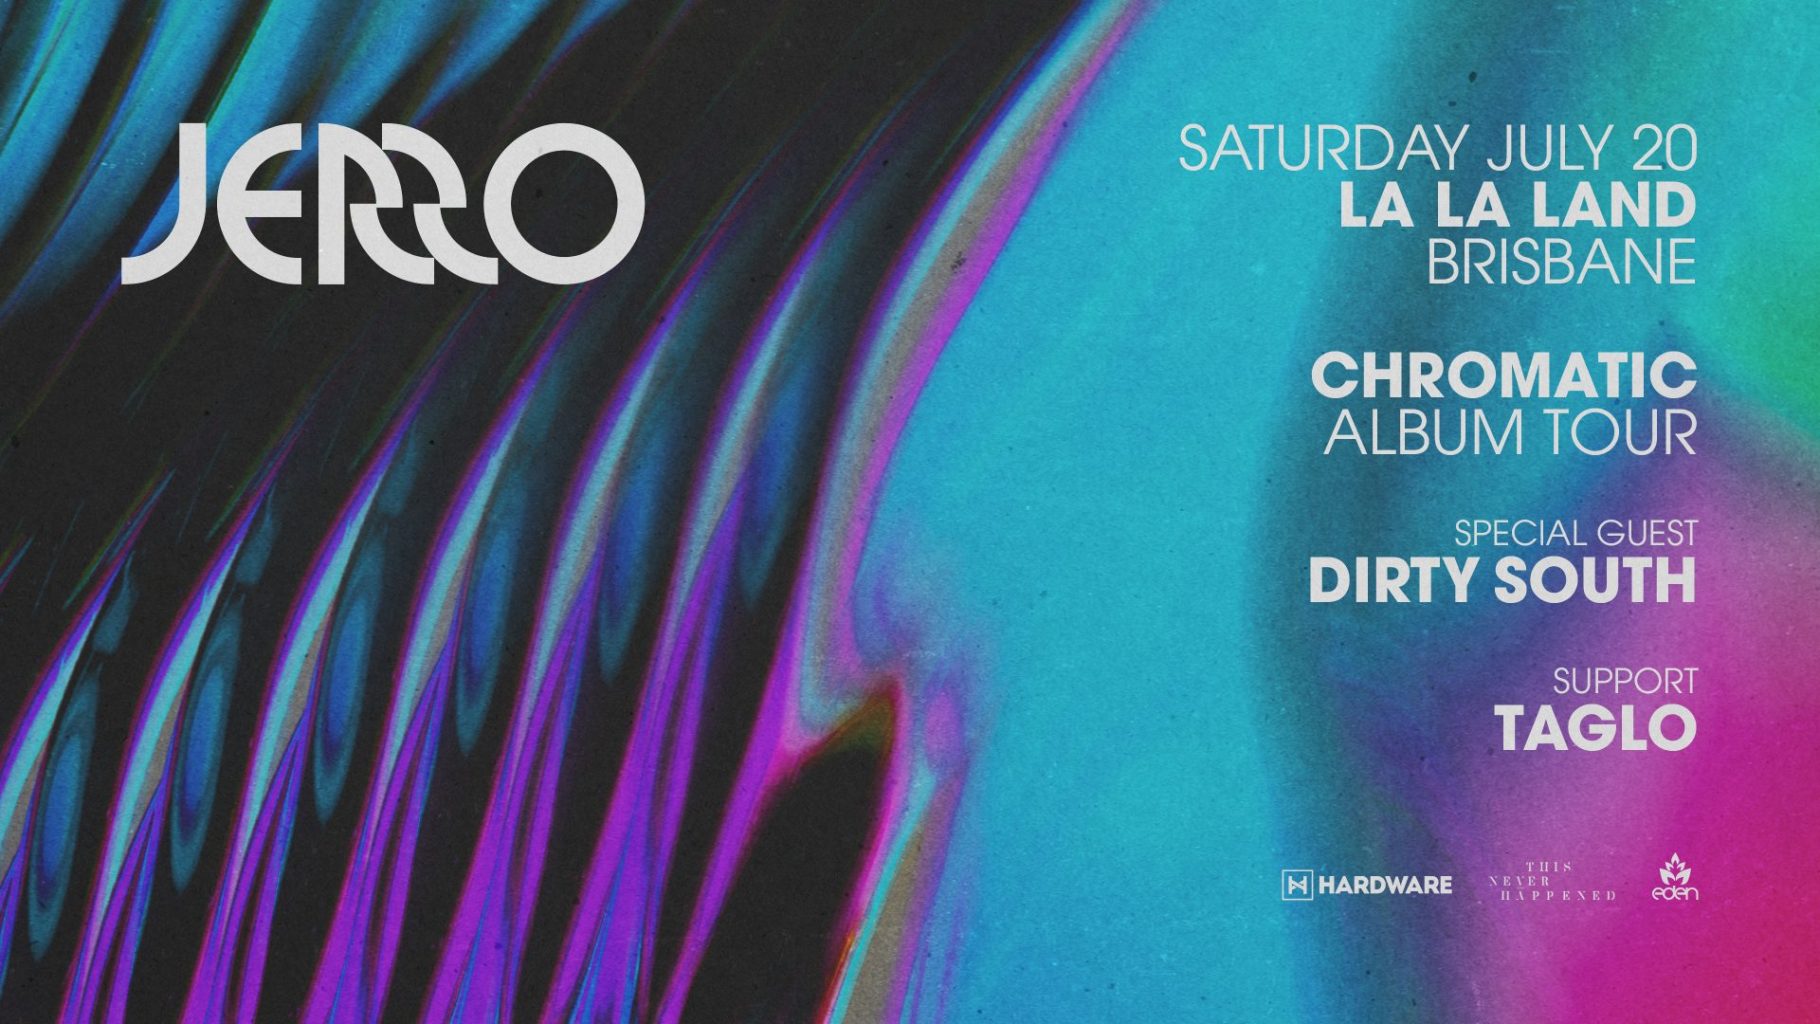 Jerro ‘Chromatic Album Tour’ + special guest Dirty South | Events at The Prince Consort